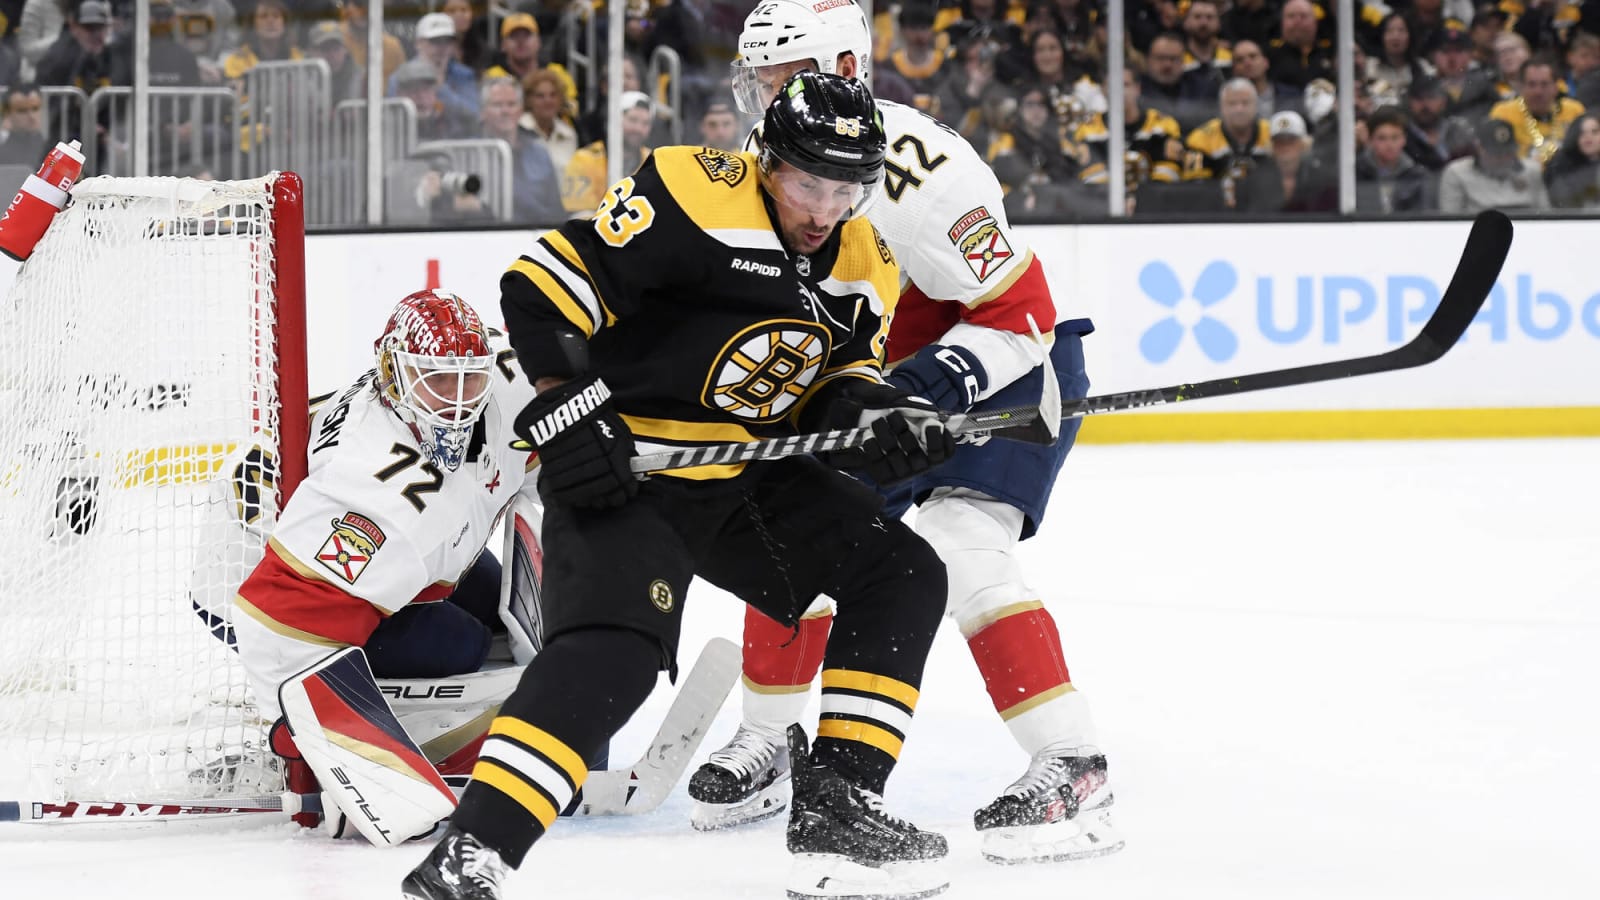 Carlo Believes Marchand Has What It Takes To Be Captain